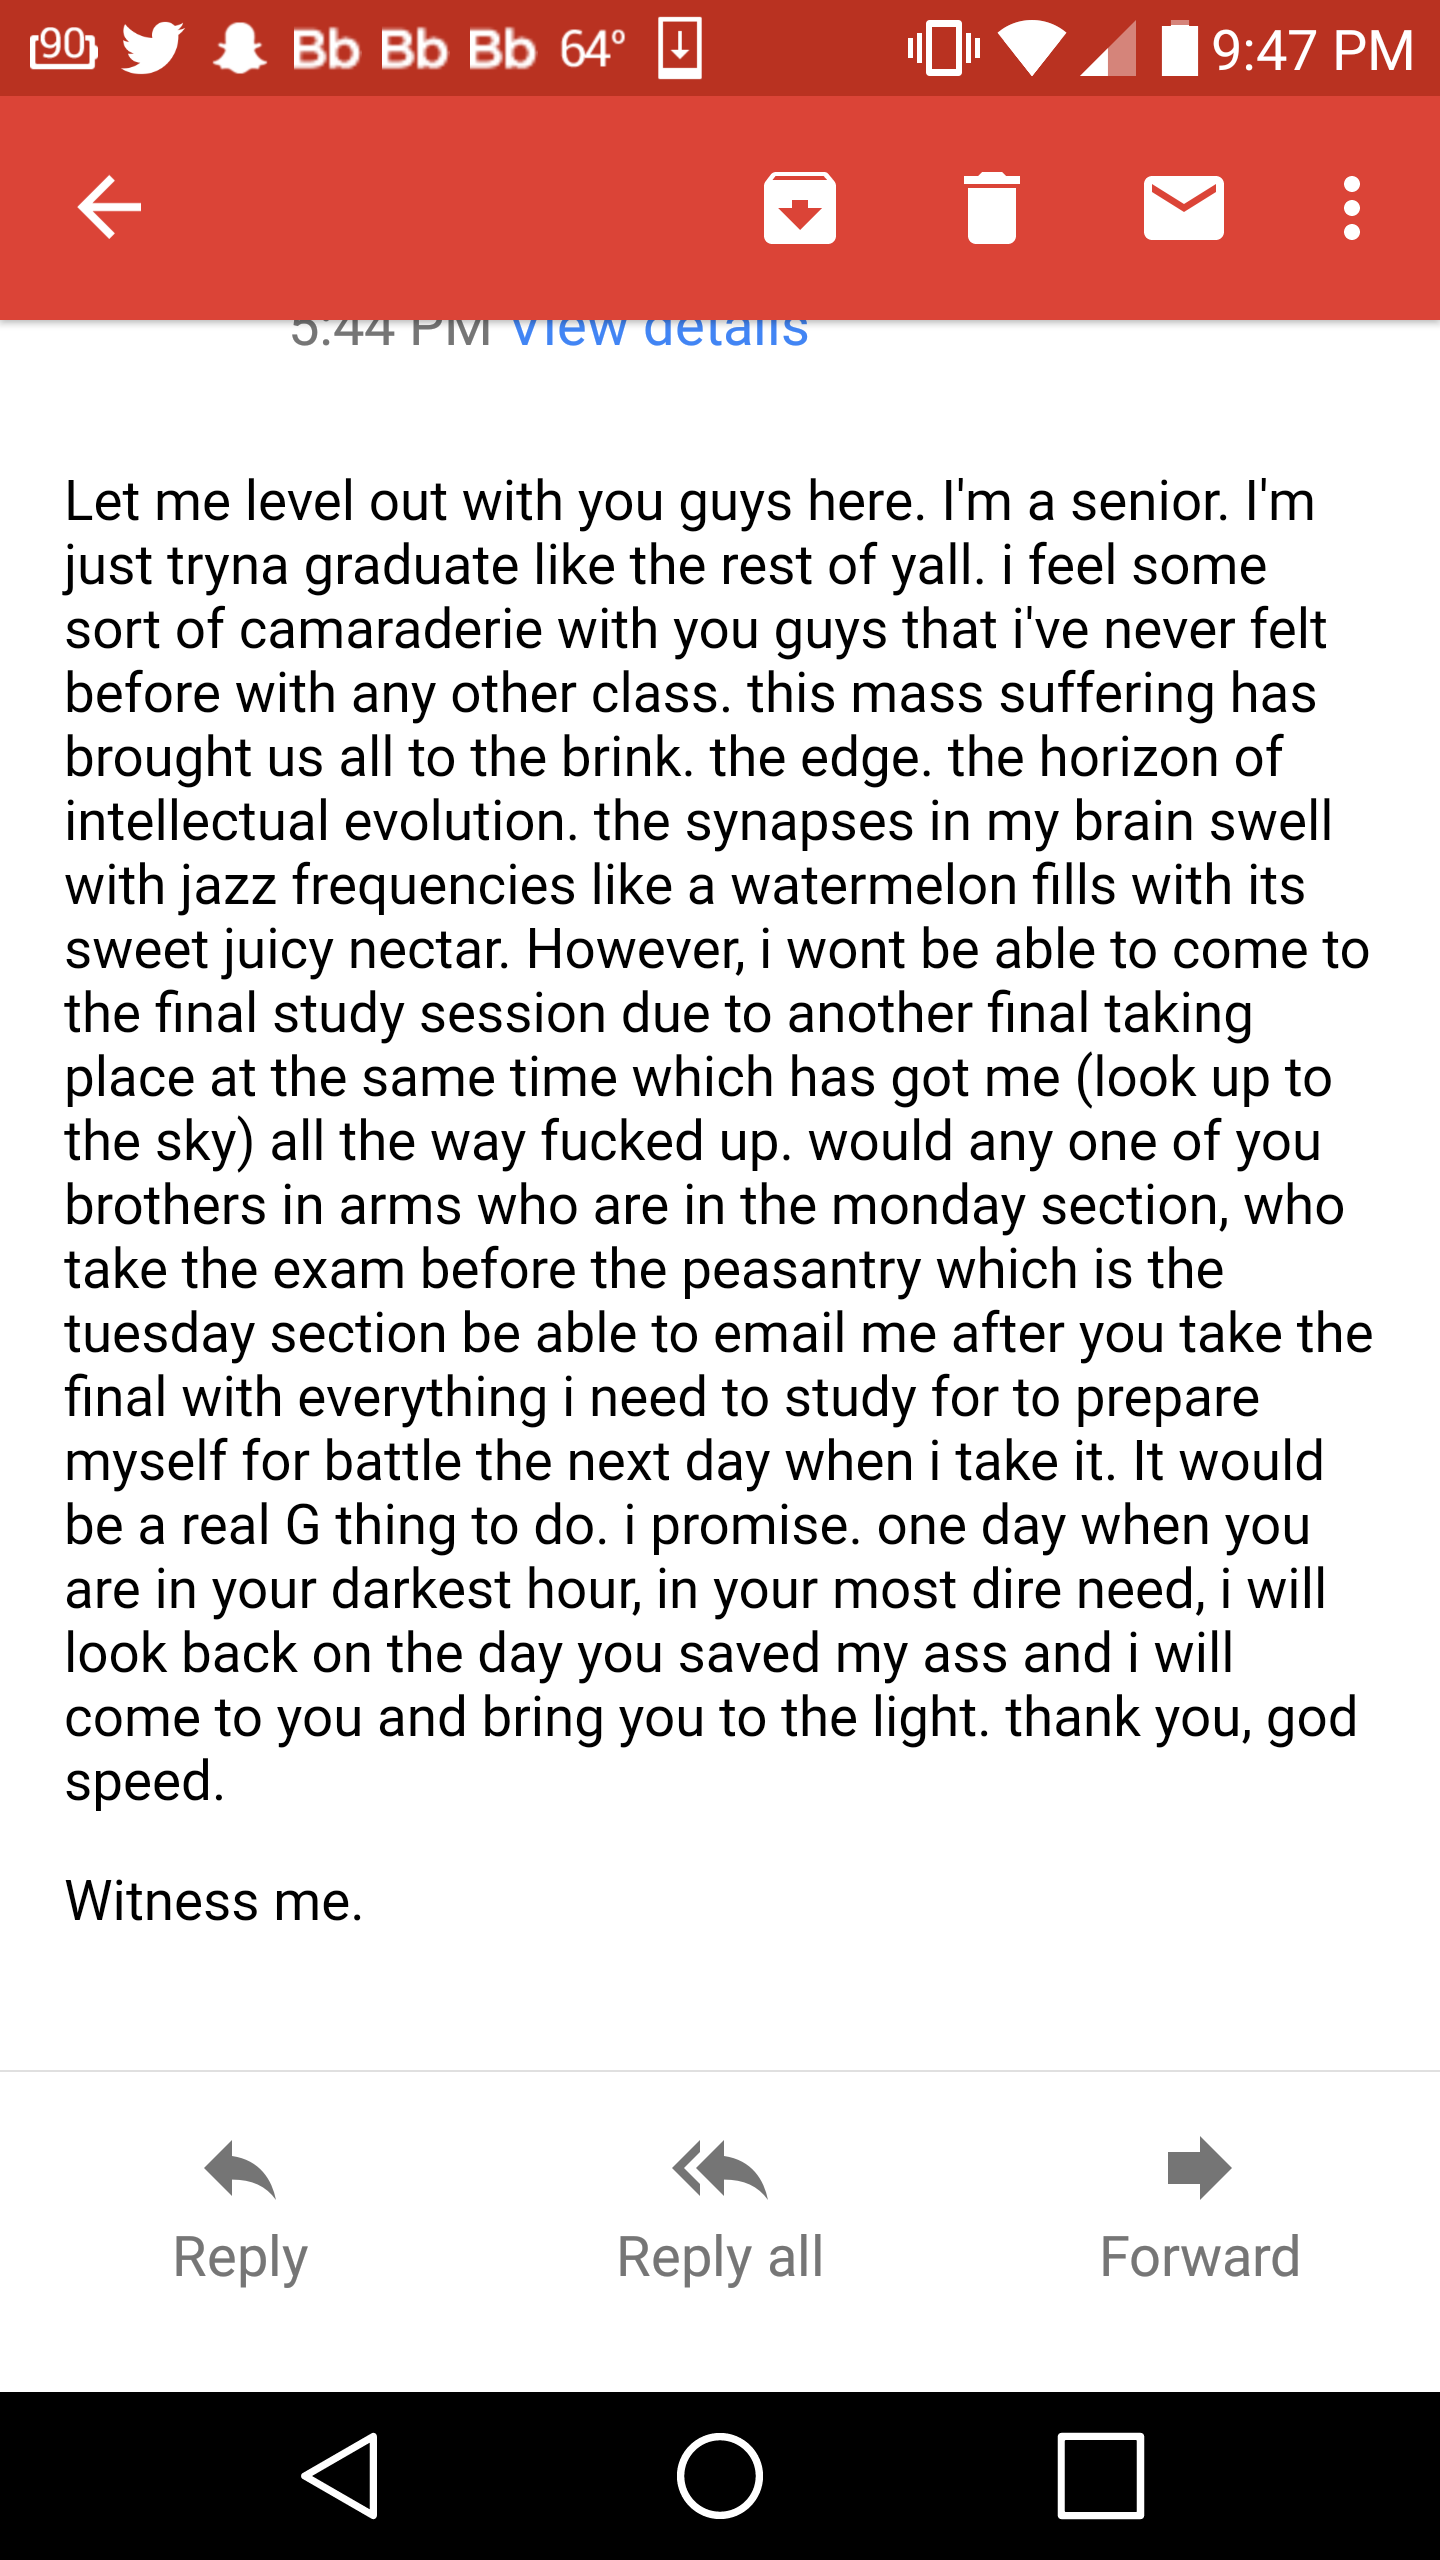 This E-mail from one of my classmates before finals